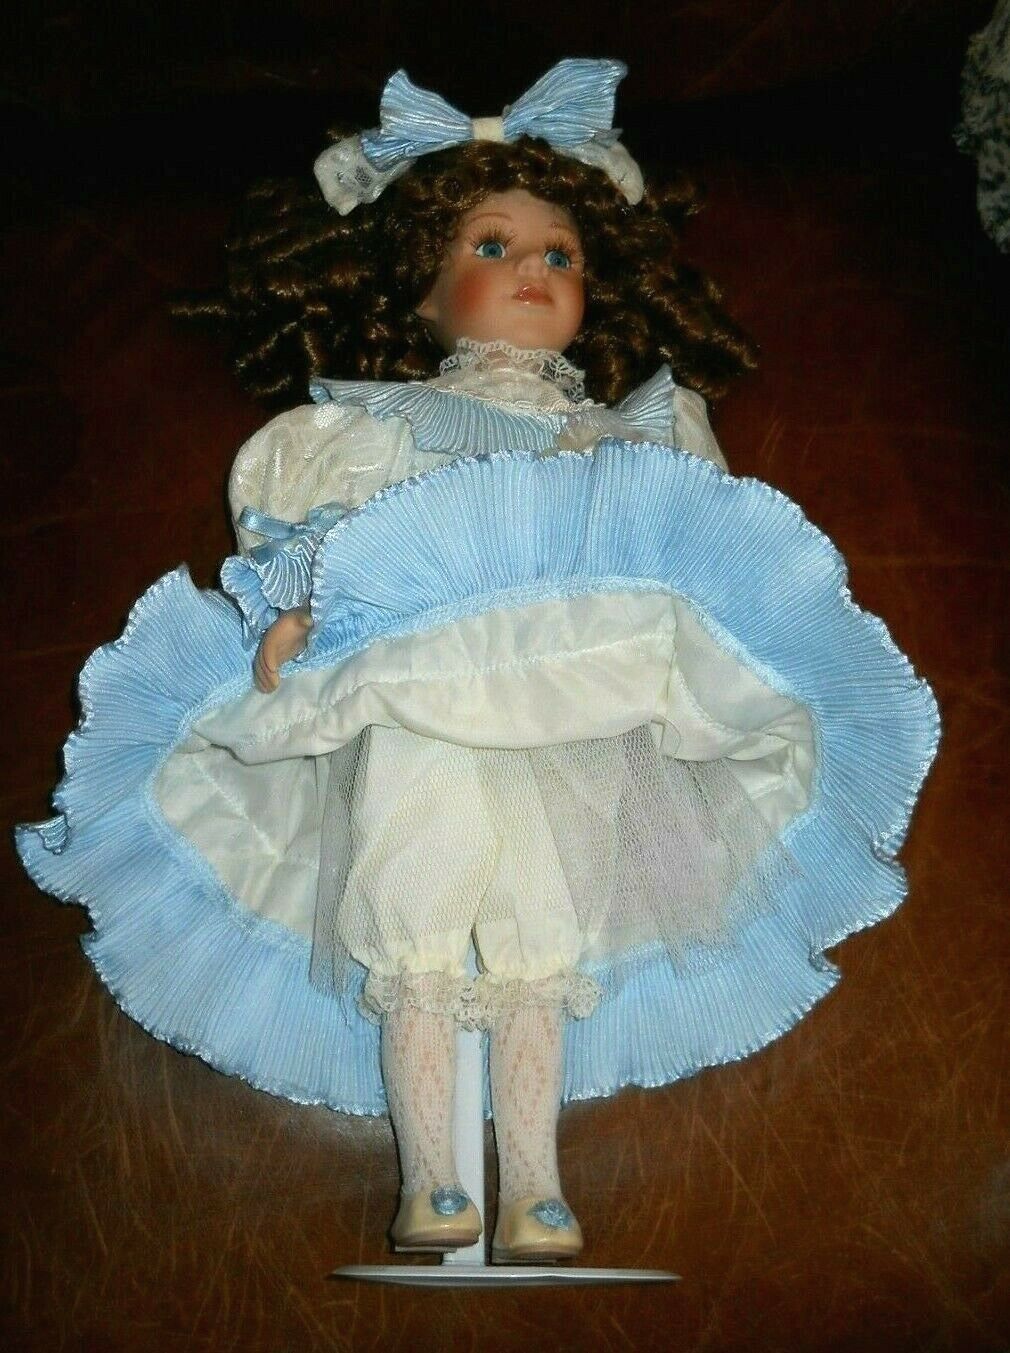 The Collector S Choice Limited Edition 17 Inch Porcelain Doll Series By